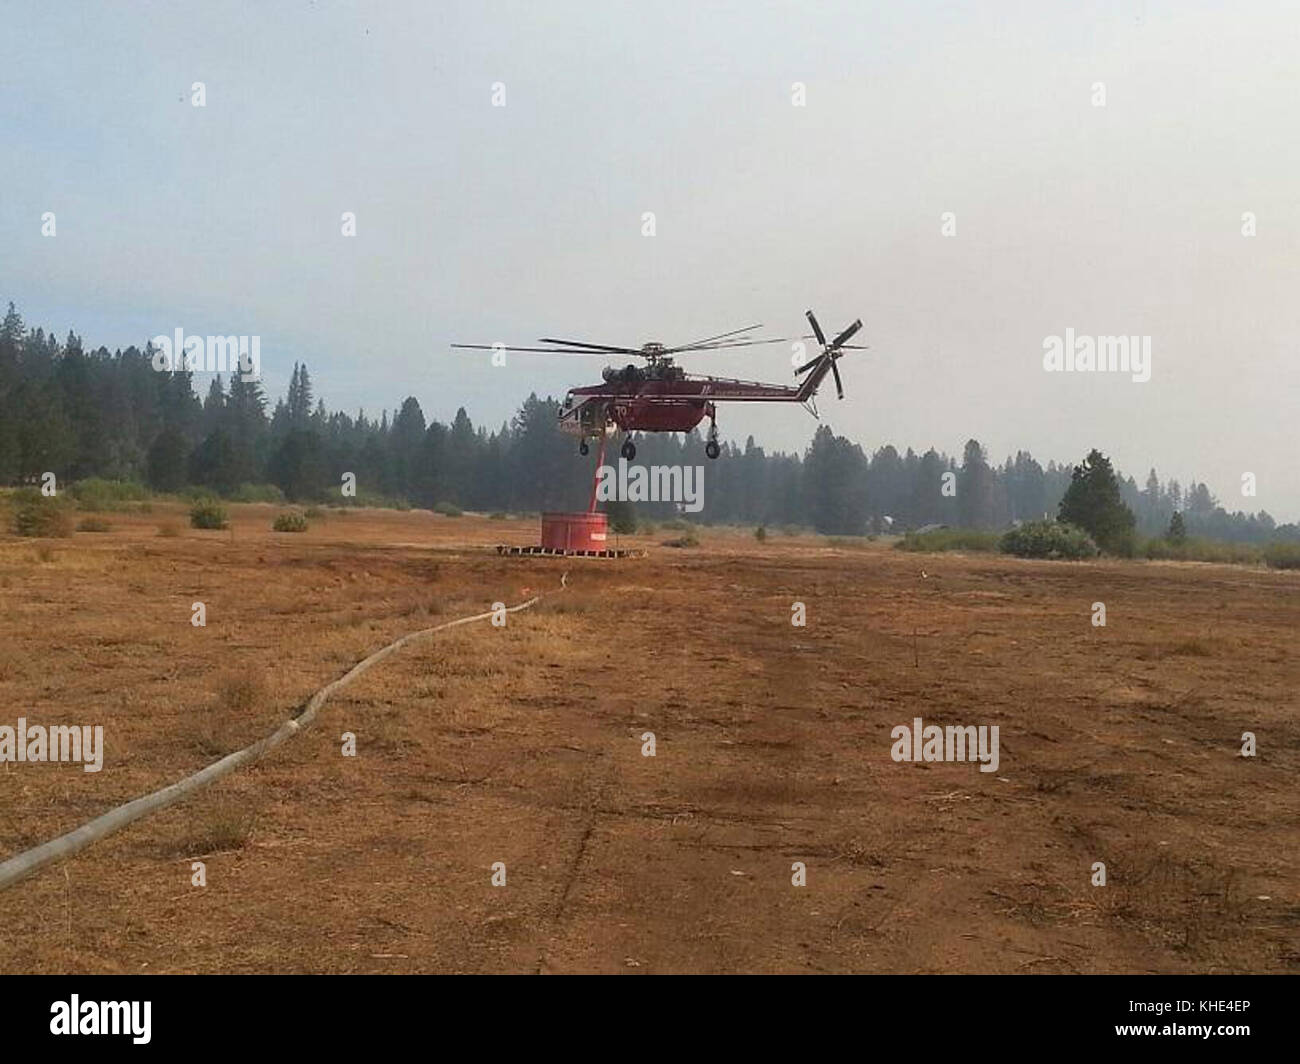 Helicopter fills water bucket at portable tank t use against the Pioneer Fire. The Pioneer Fire located in the Boise National Forest near Idaho City, ID began on Jul. 18, 2016 and the cause is under investigation.  The Pioneer Fire has consumed 96,469 acres. U.S. Forest Service photo. Stock Photo